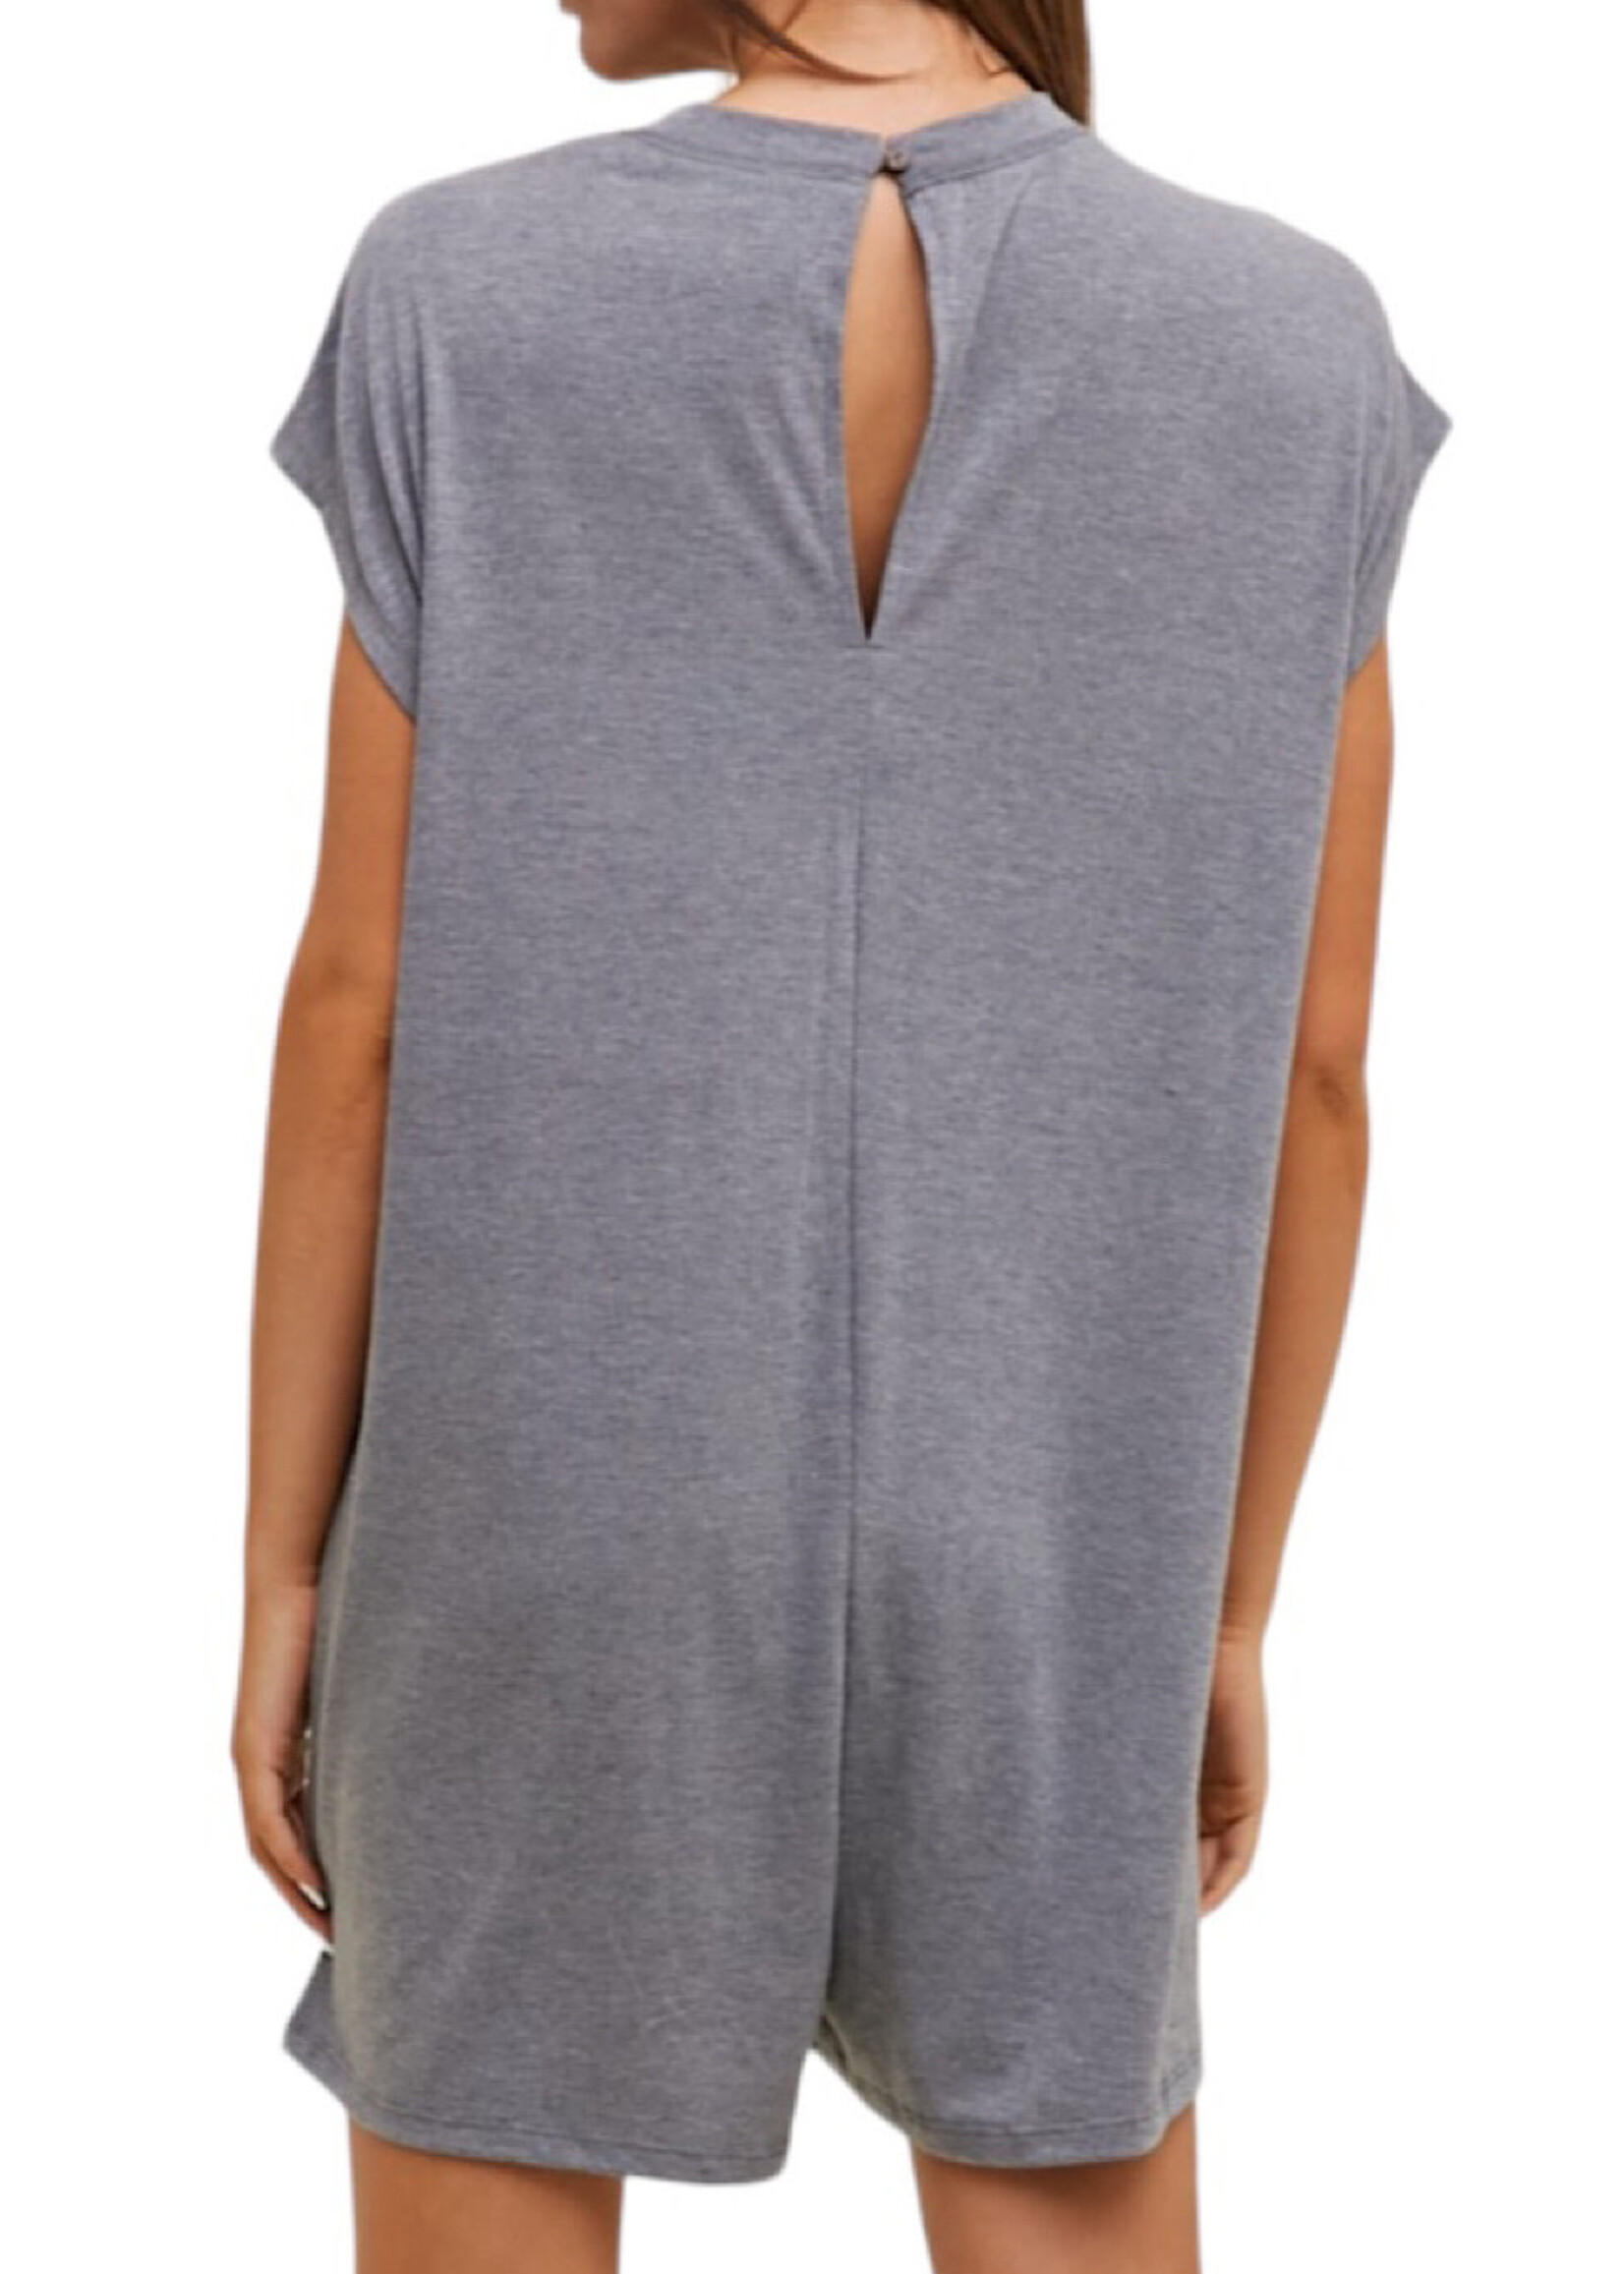 Charcoal Melange Knit Boxy Romper with Pockets